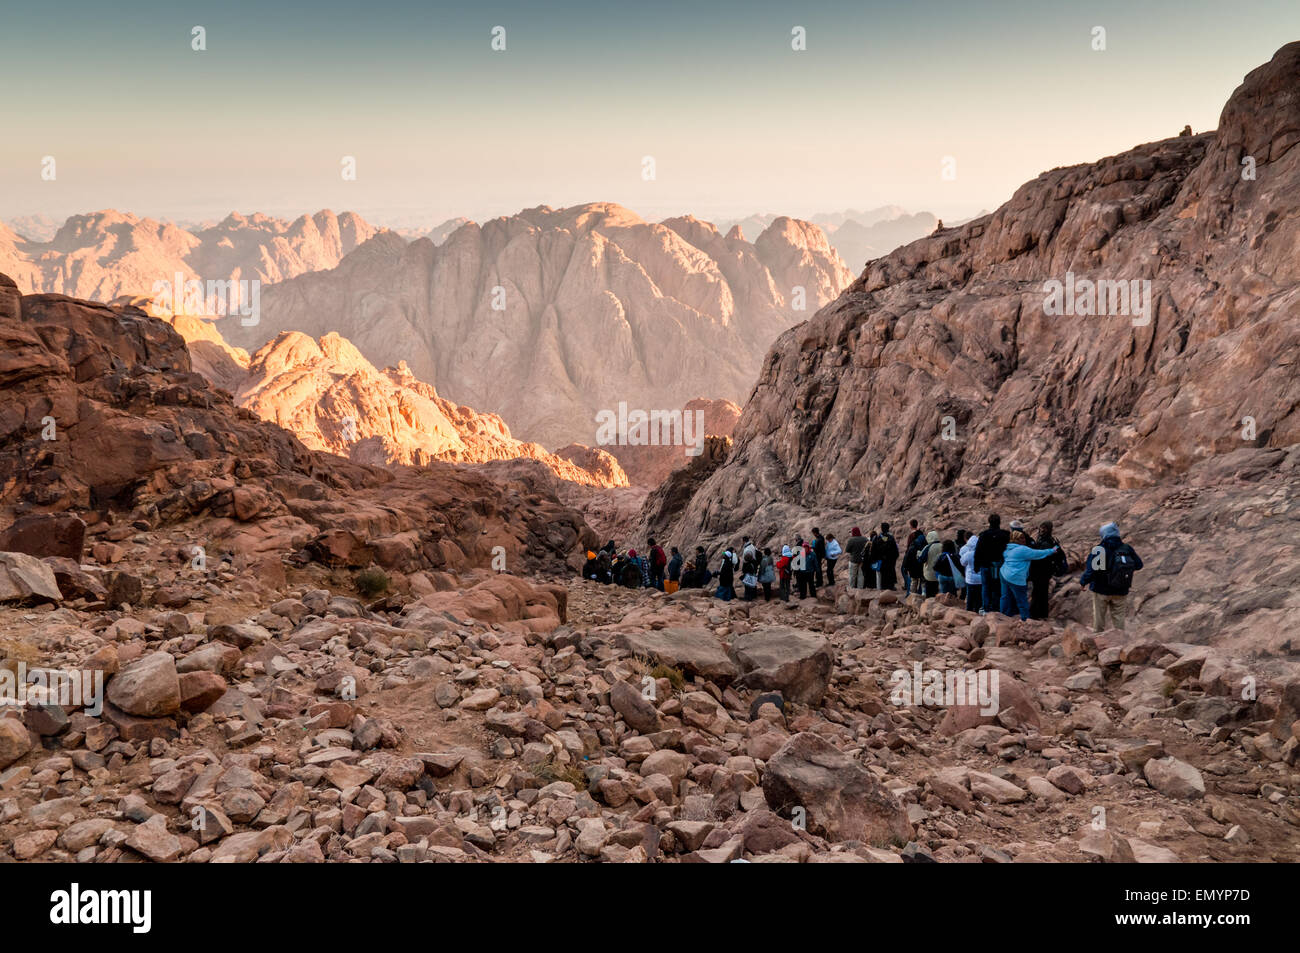 Pilgrims and tourists on the pathway from the Mount Sinai peak and panorama rocks of Mount Sinai Stock Photo